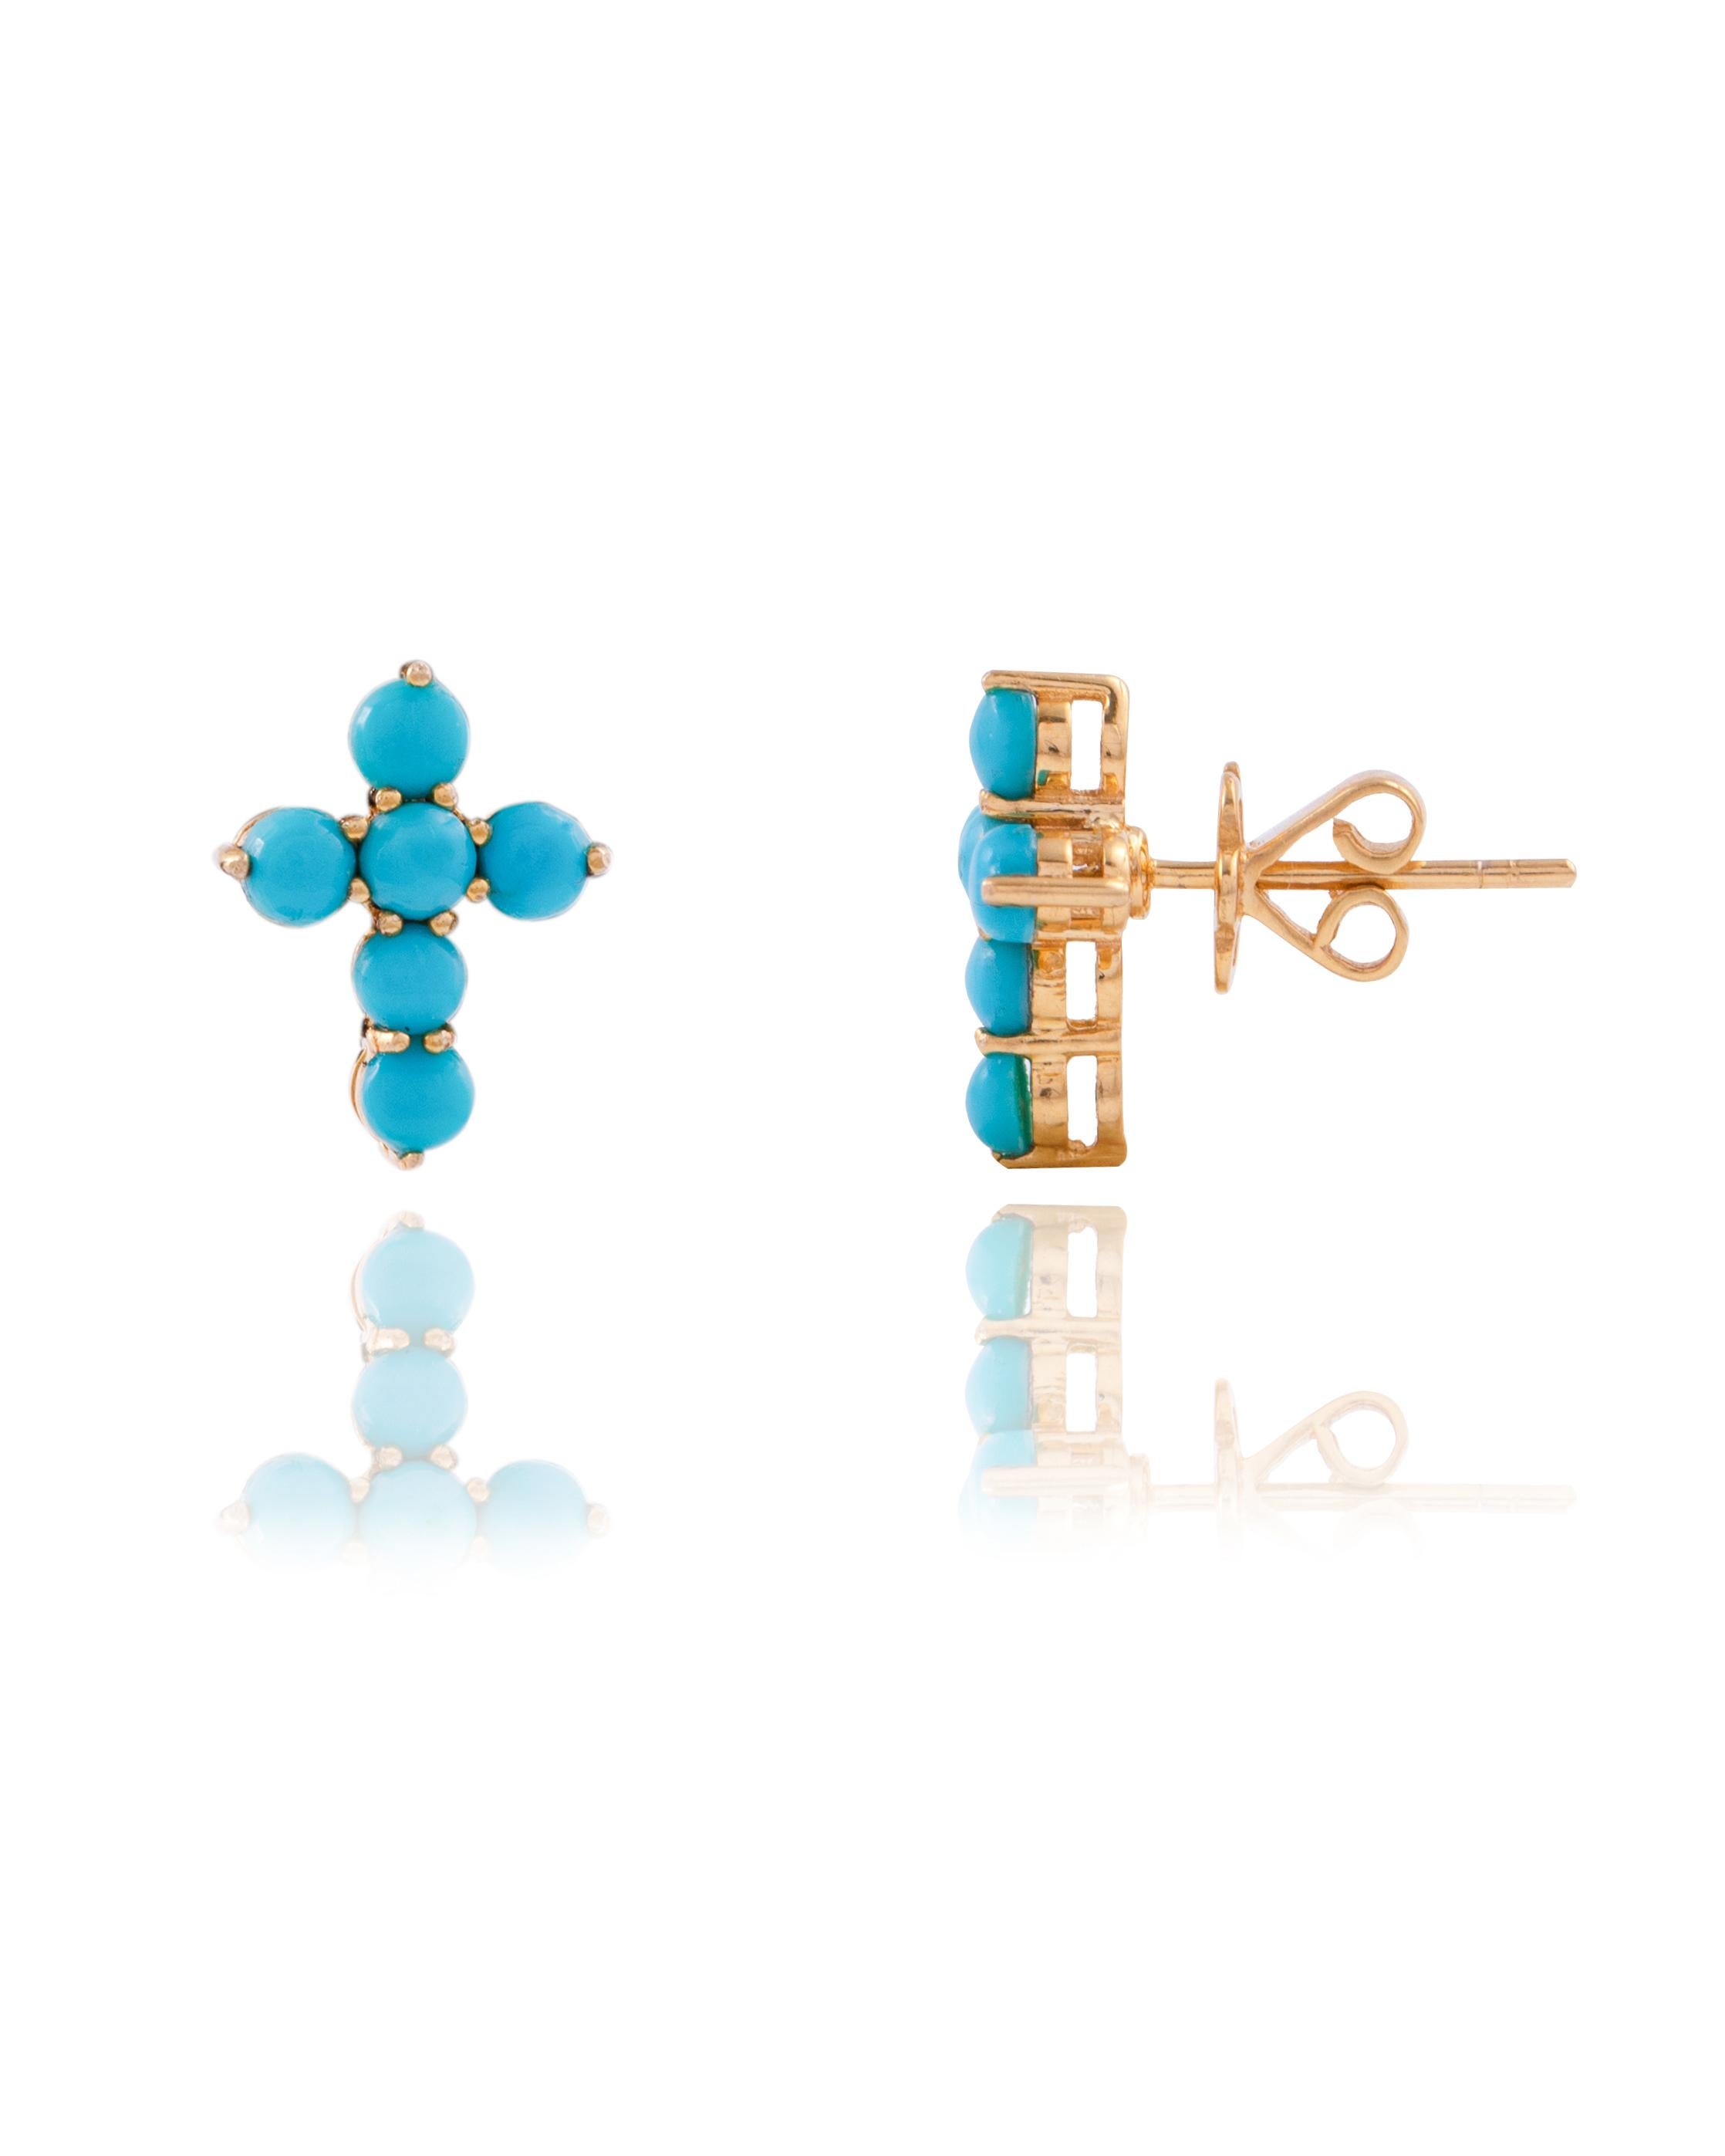 Contemporary earrings that redefine modern elegance. In 14K yellow gold, Turquoise Gemstone Earrings feature 1.53 Ct Turquoise Gemstone embedded on a golden bar.

Specification:

Dimensions: 14*11 mm
Gross Weight: 2.730 gms
Gold Weight: 2.424